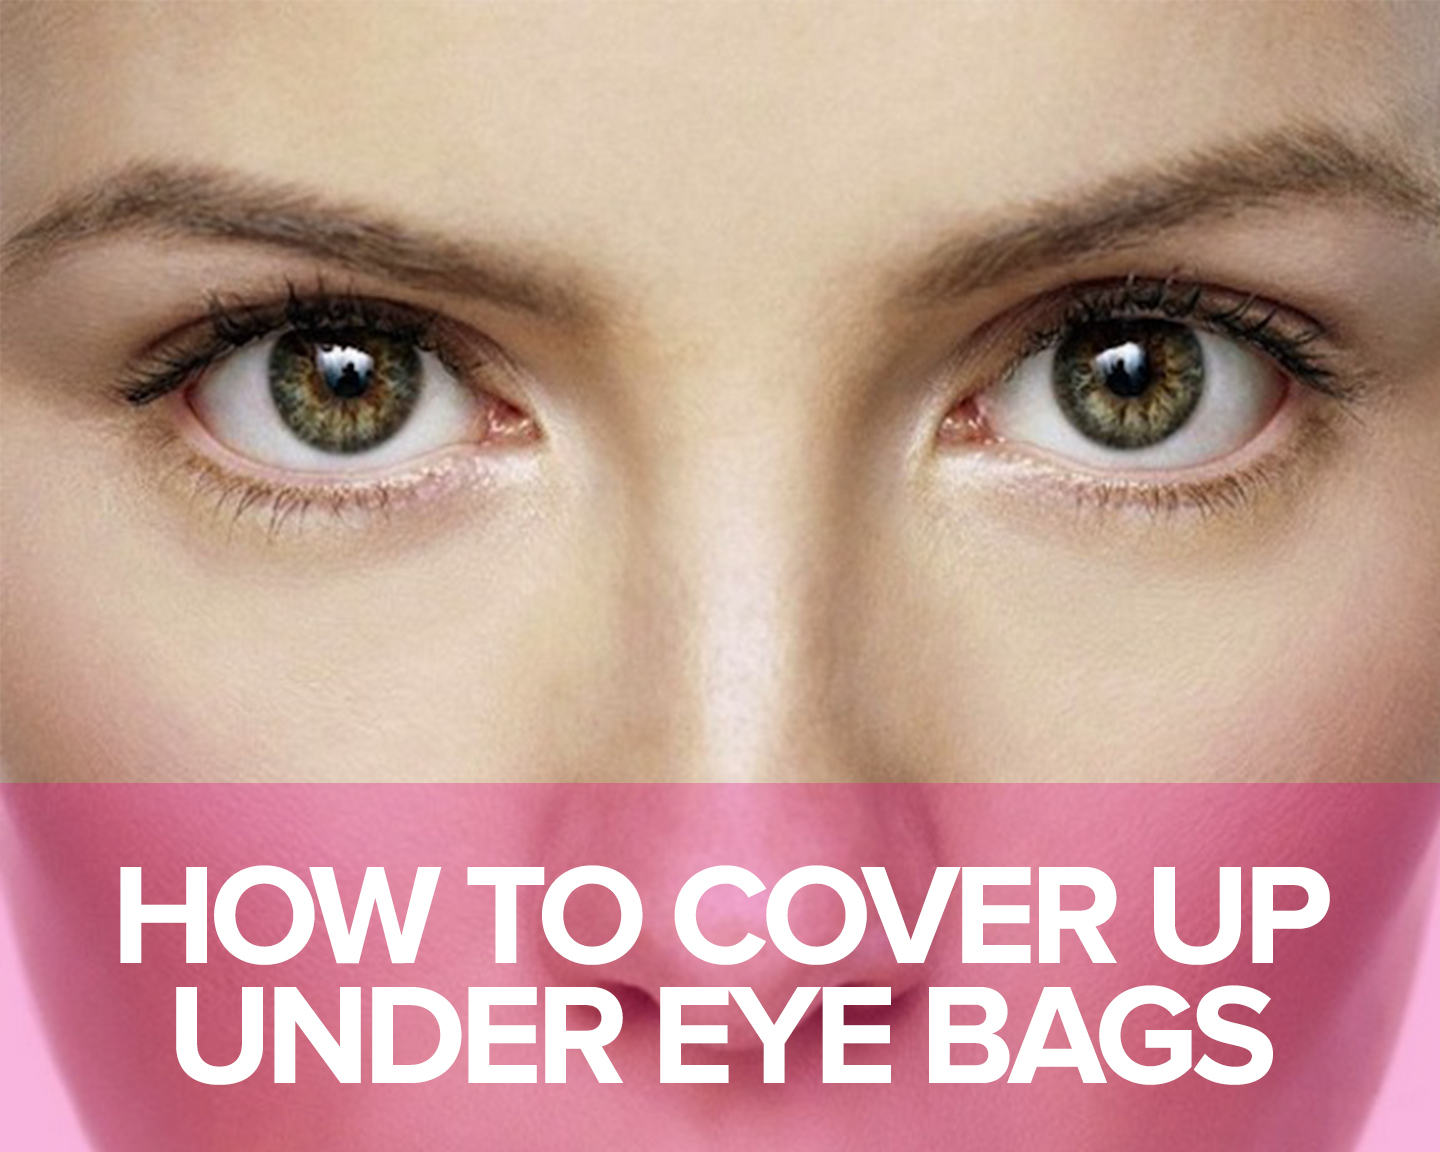 Makeup For Under Eye Bags How To Cover Up Under Eye Bags Makeup Caitlyn Michelle